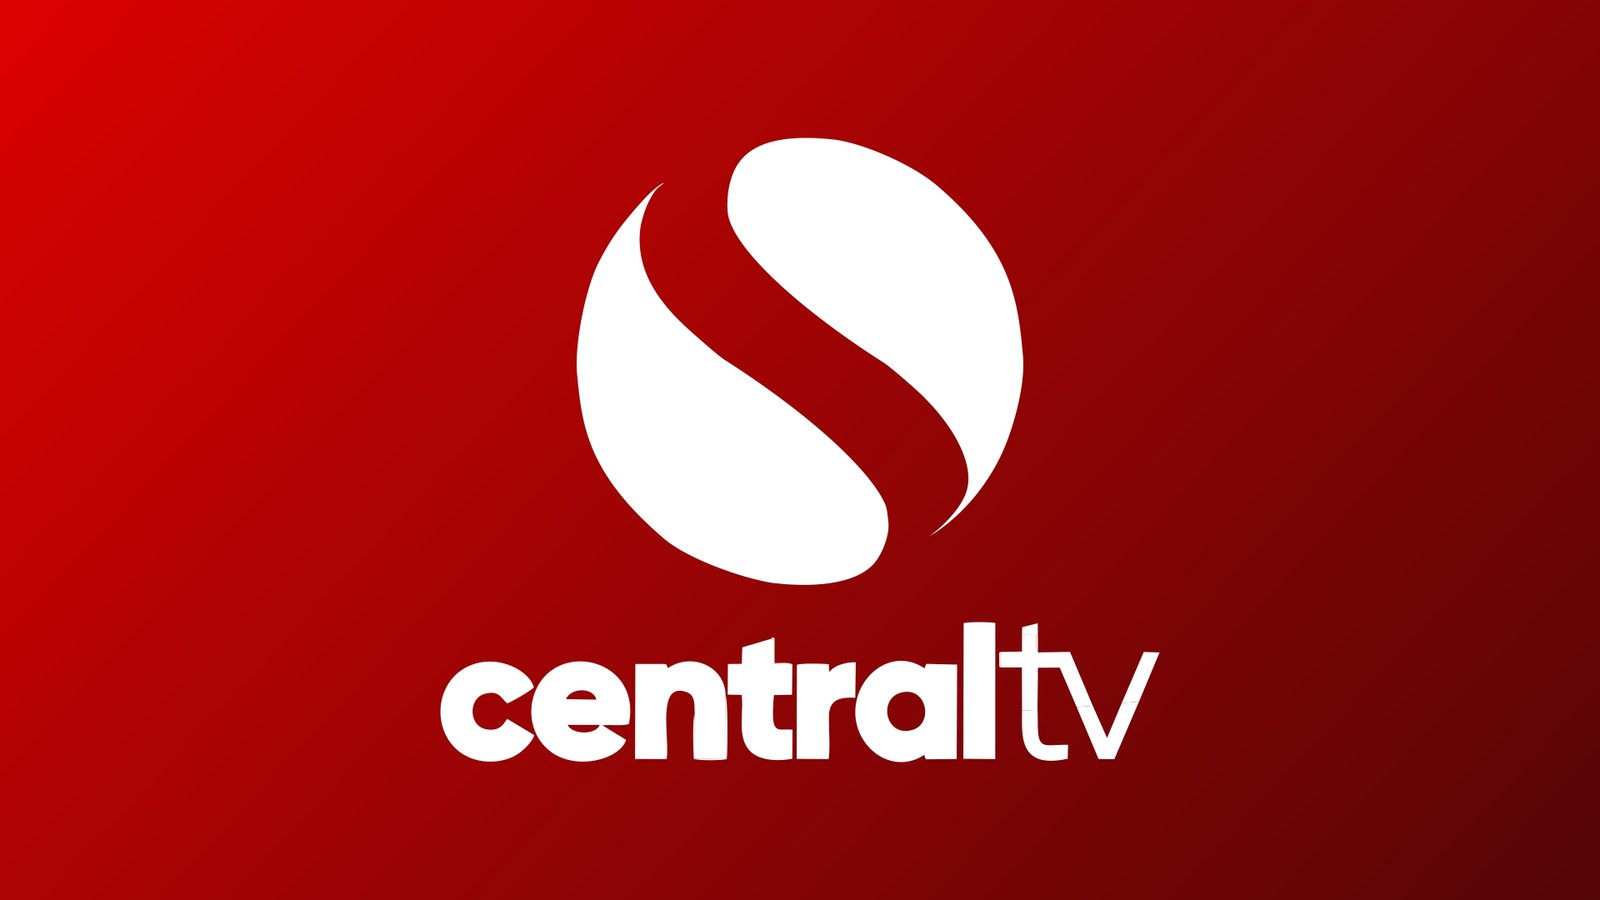 CENTRAL TV - CANAL 178